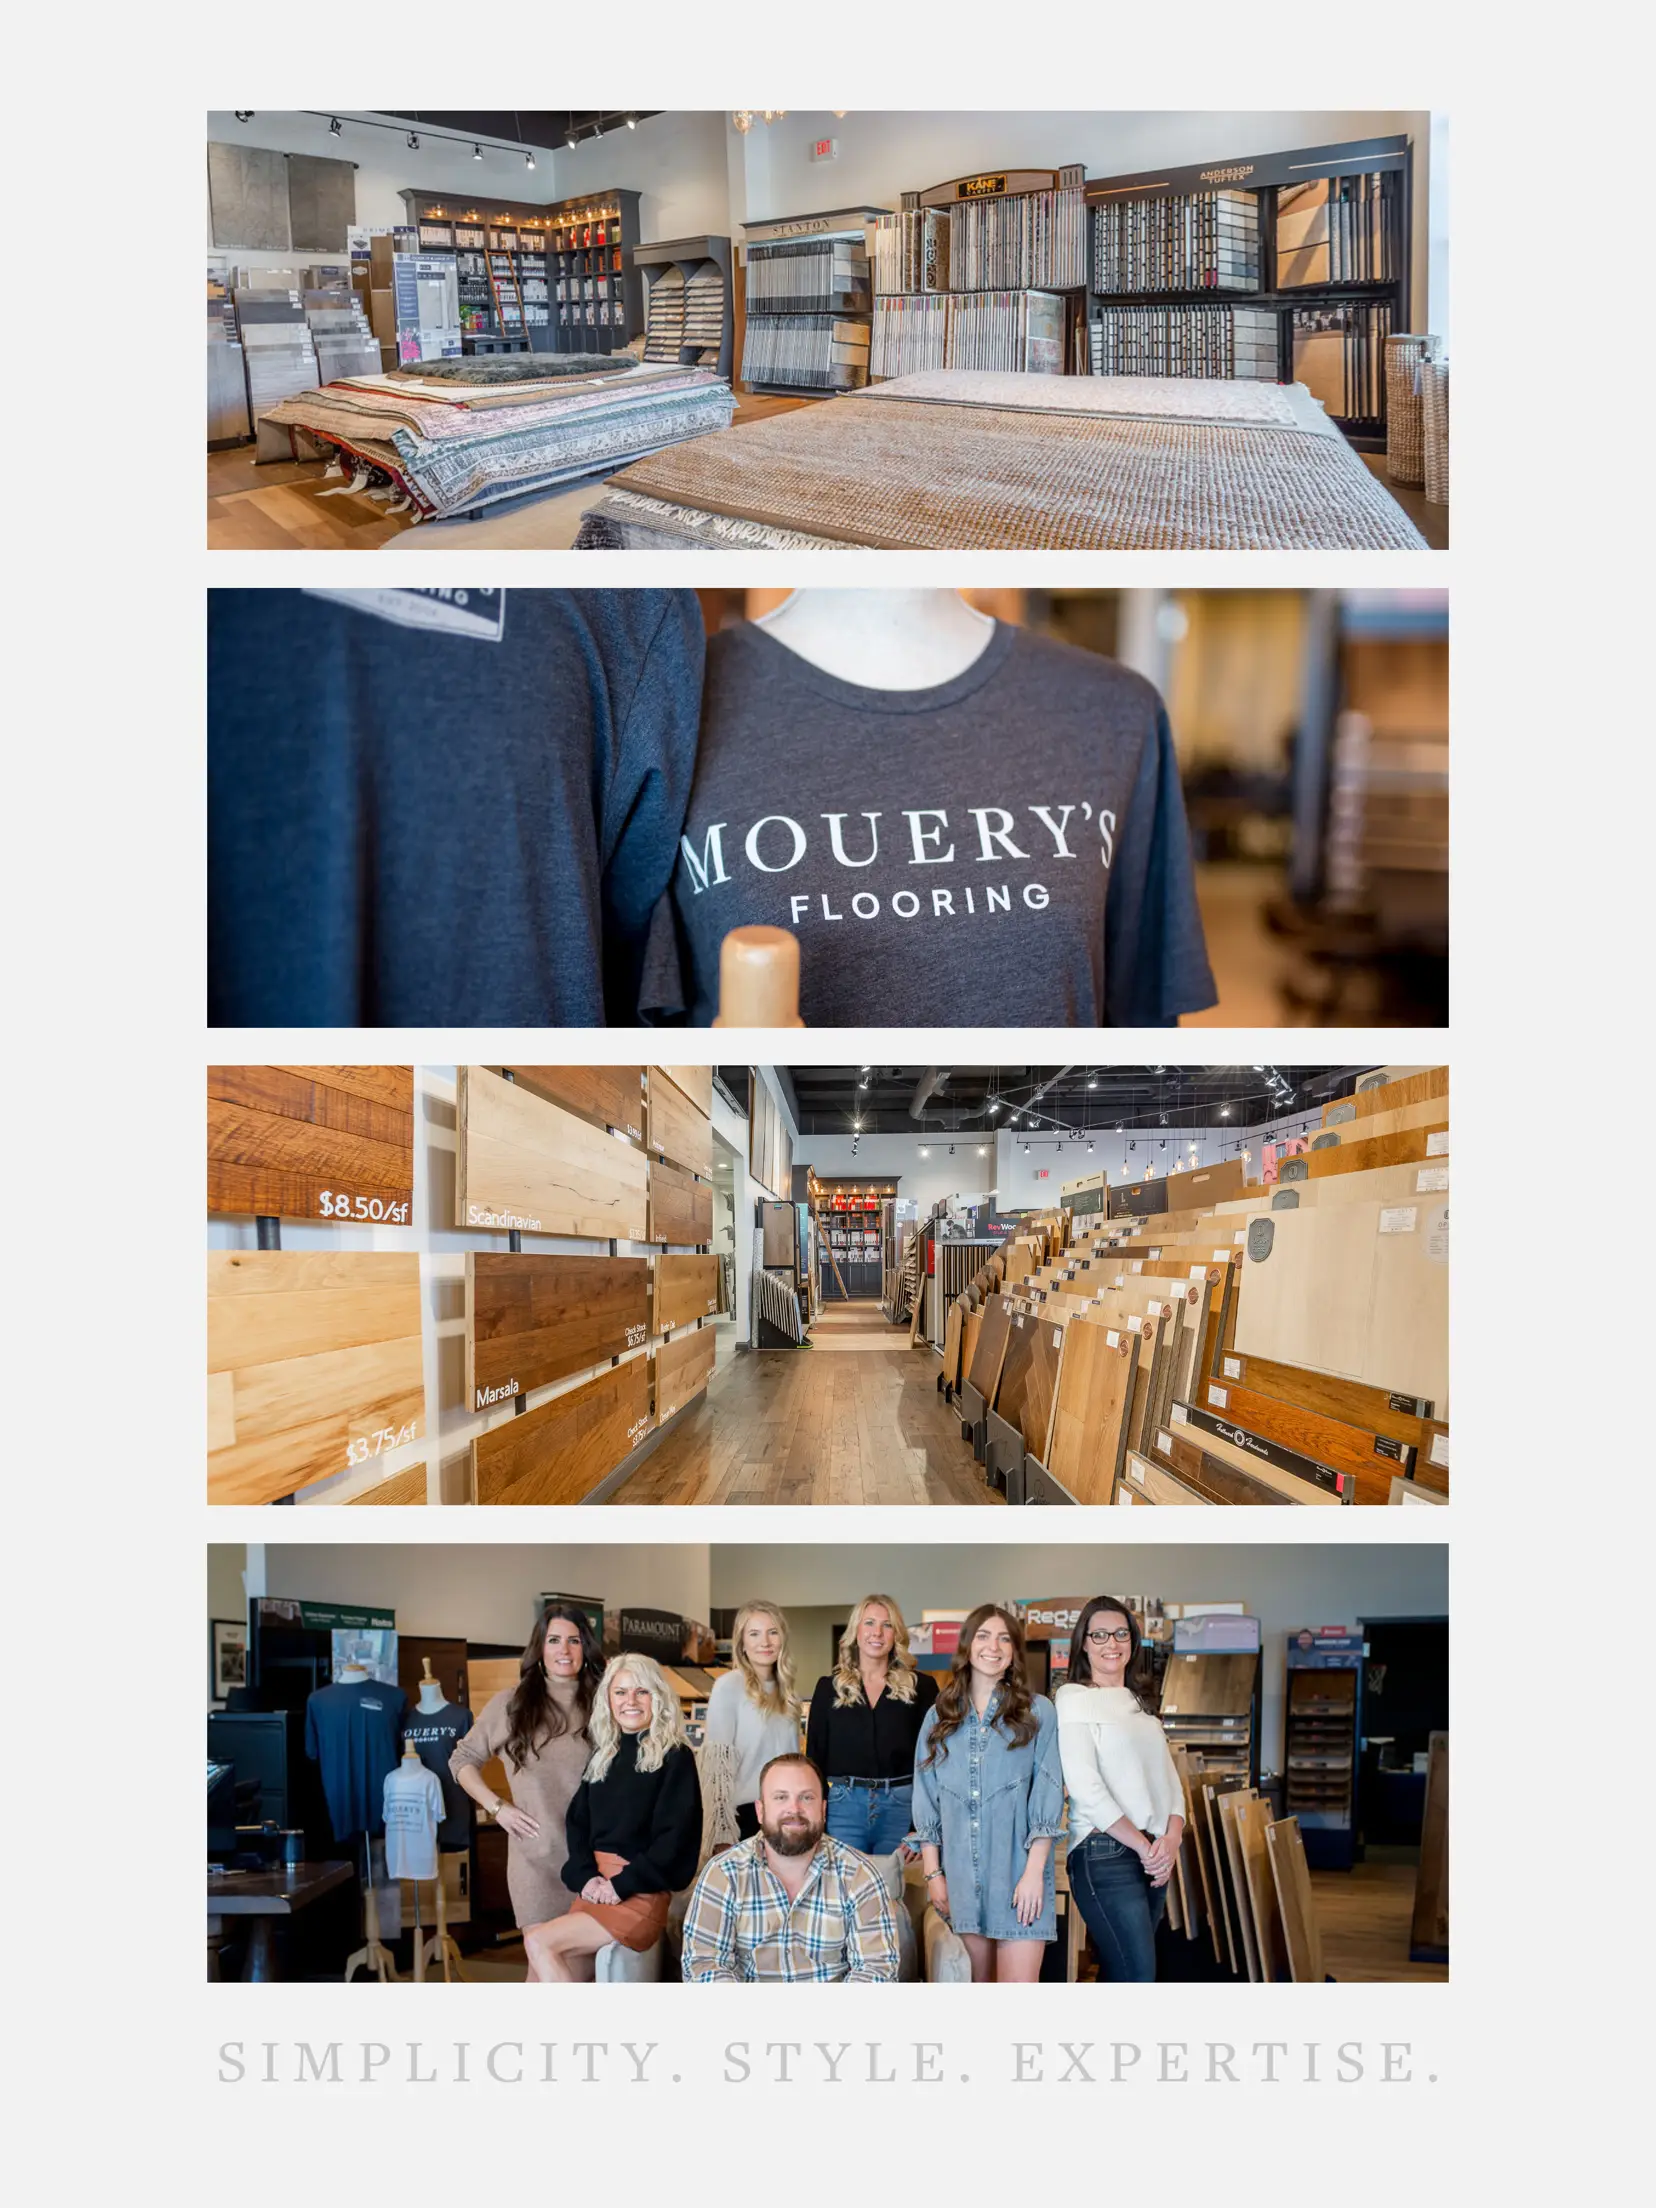 A Step In The Right Direction — Mouery's Flooring